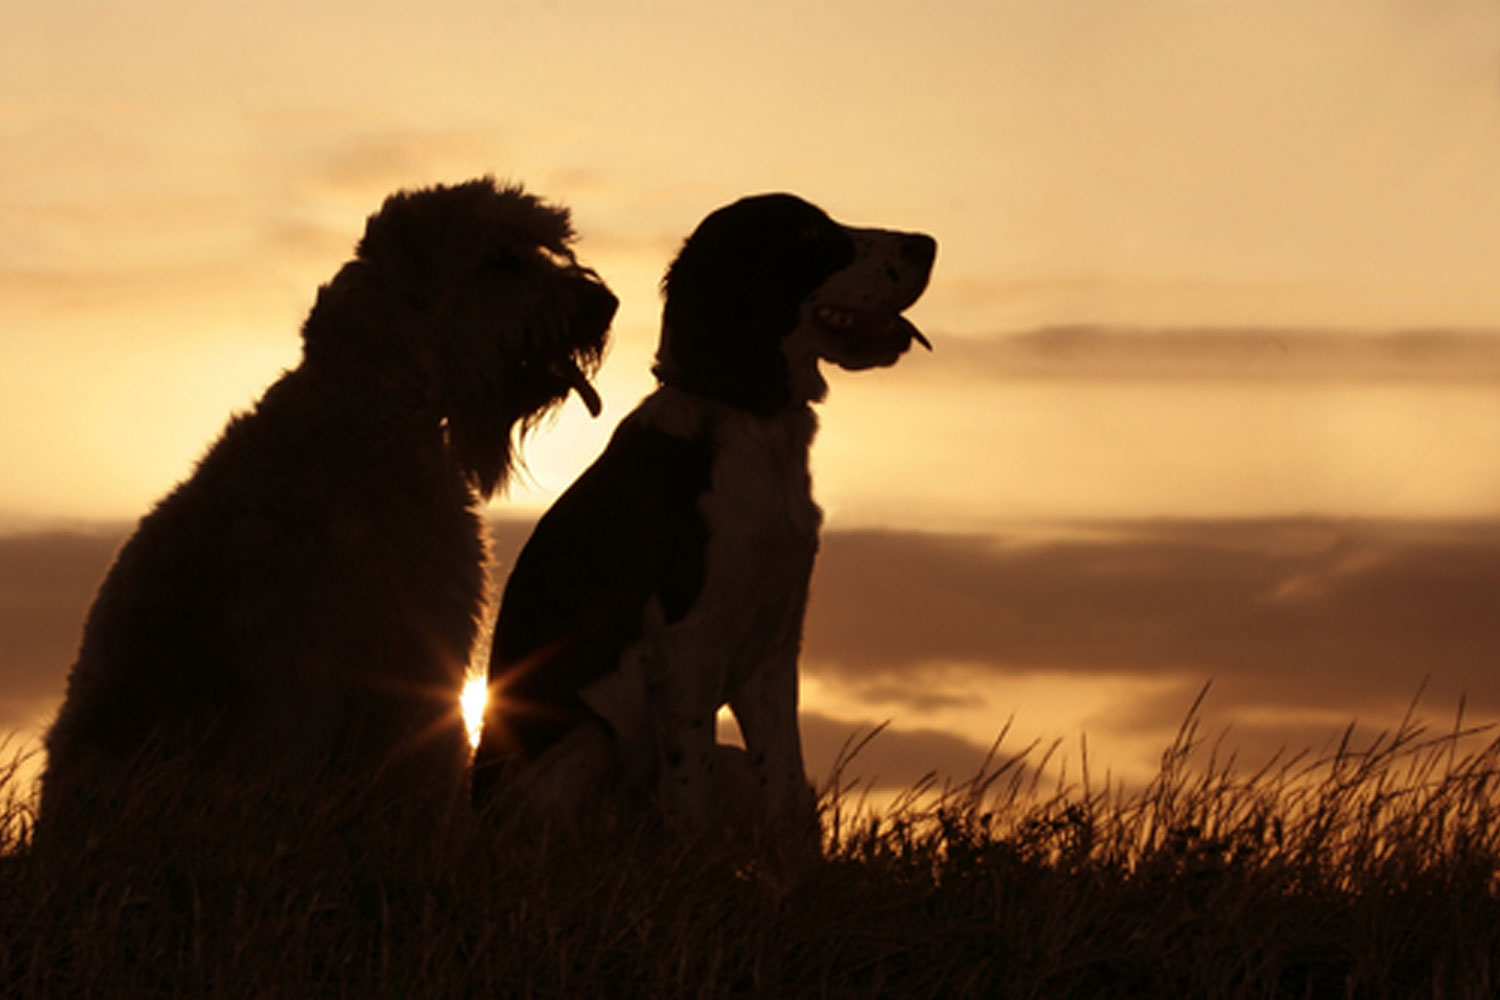 Two Dogs at Sunset